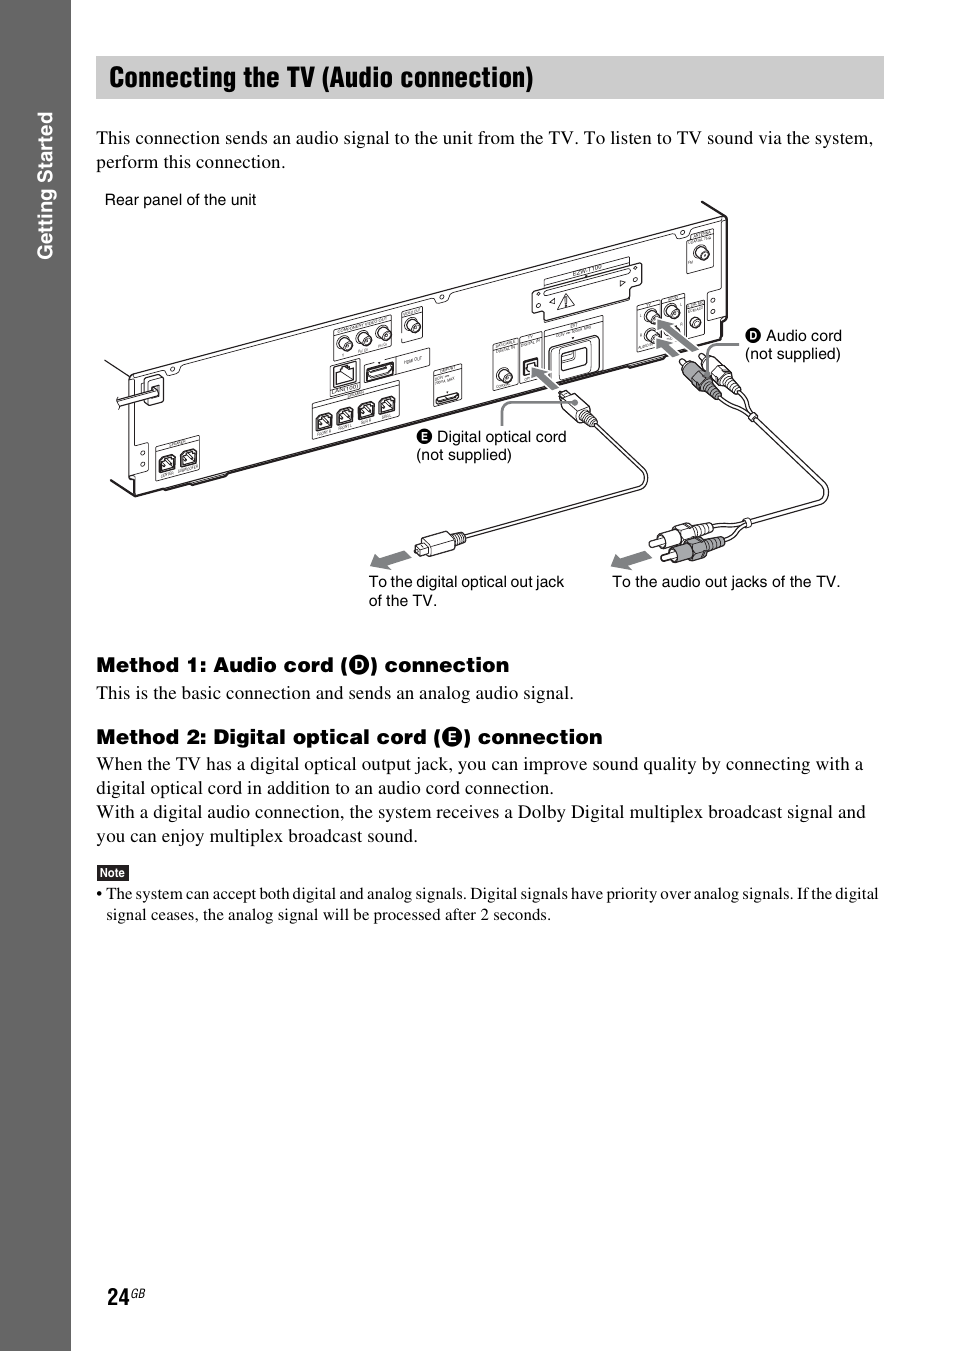 Connecting the tv (audio connection), E 24), Gettin g star ted | Sony  Ericsson BDV-E300 User Manual | Page 24 / 115 | Original mode